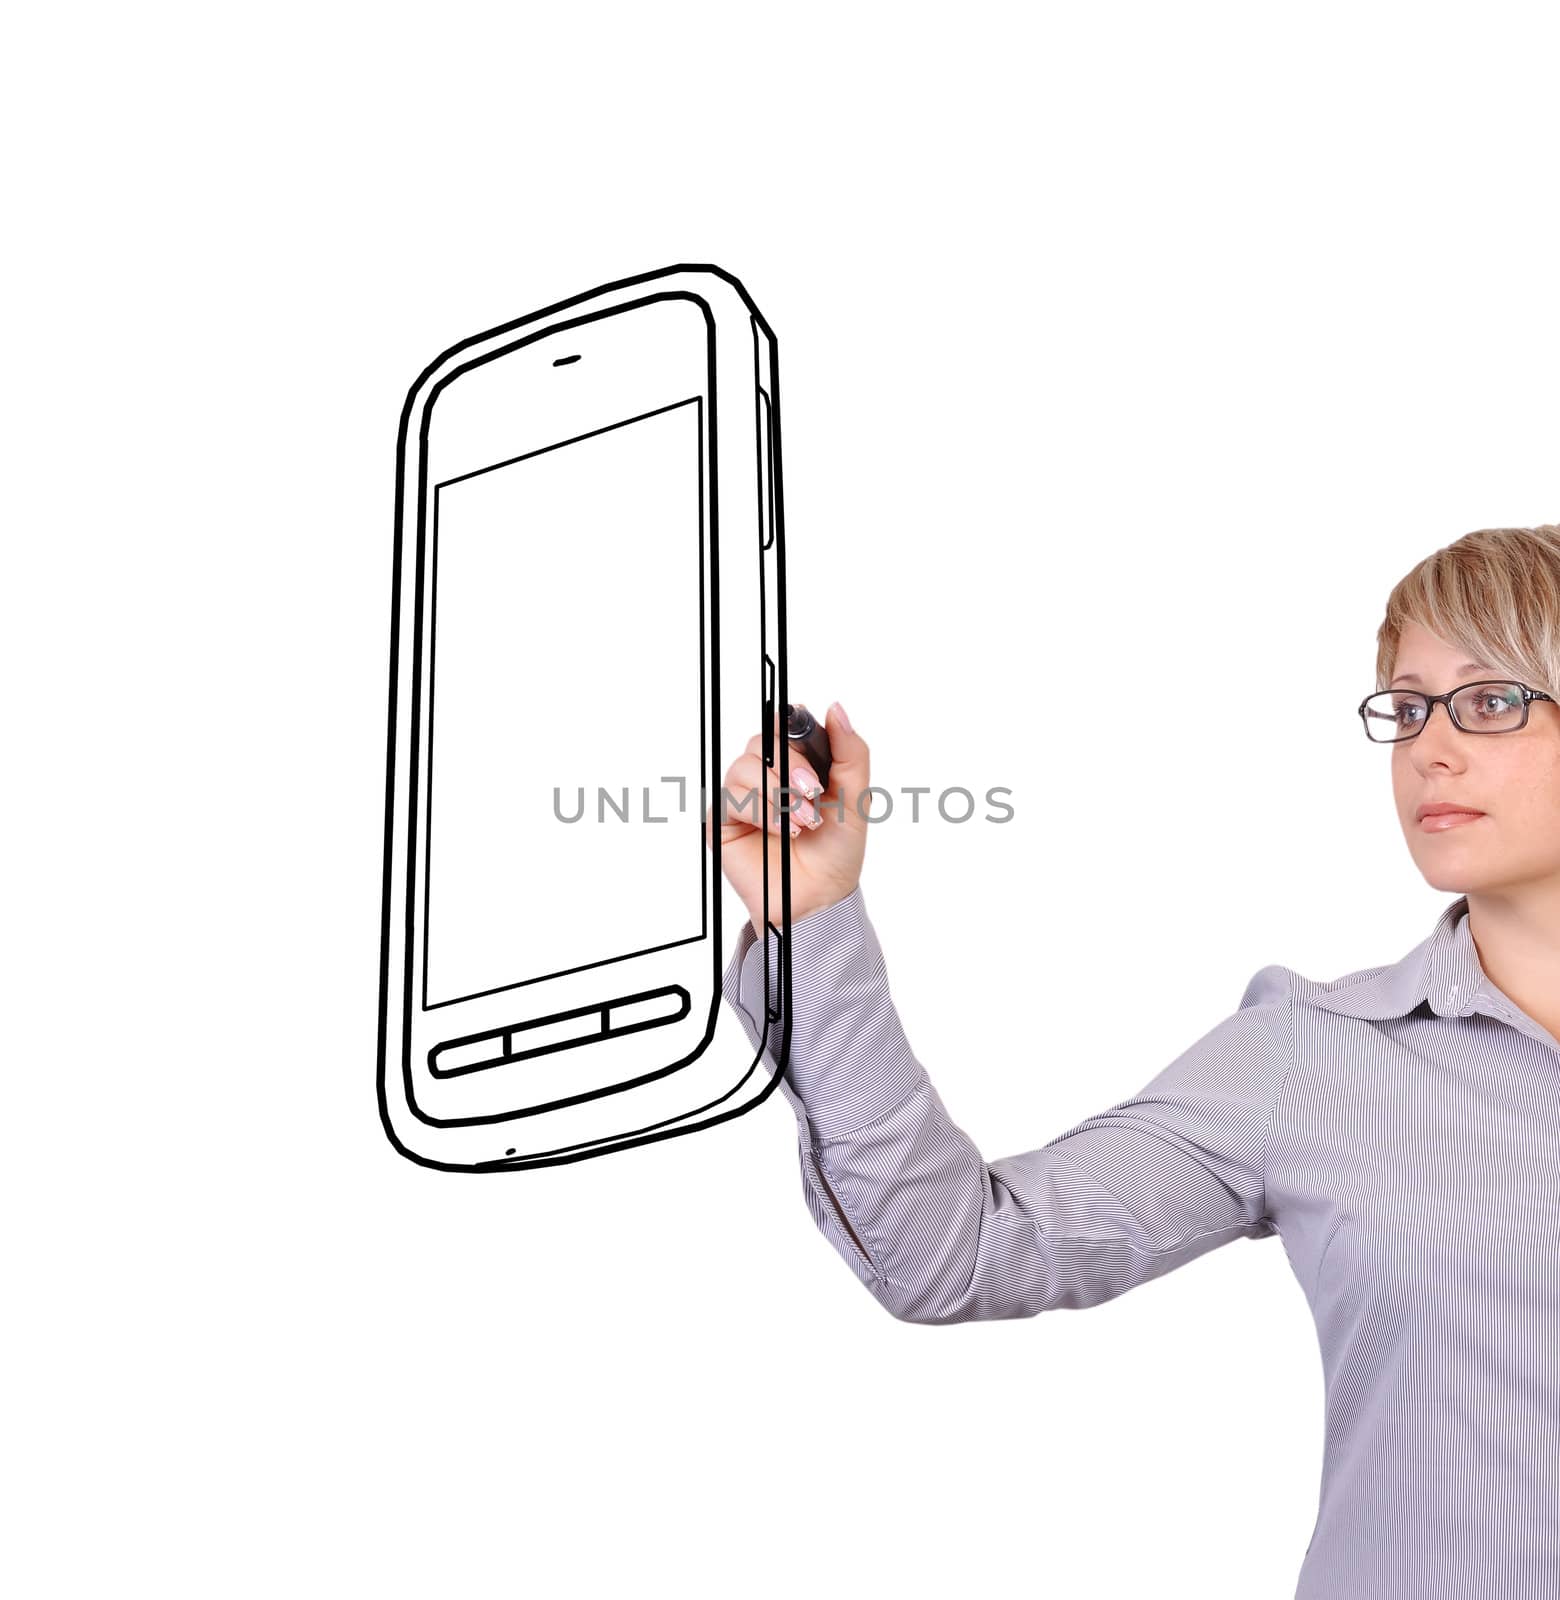 businesswoman drawing mobile phone on a white background